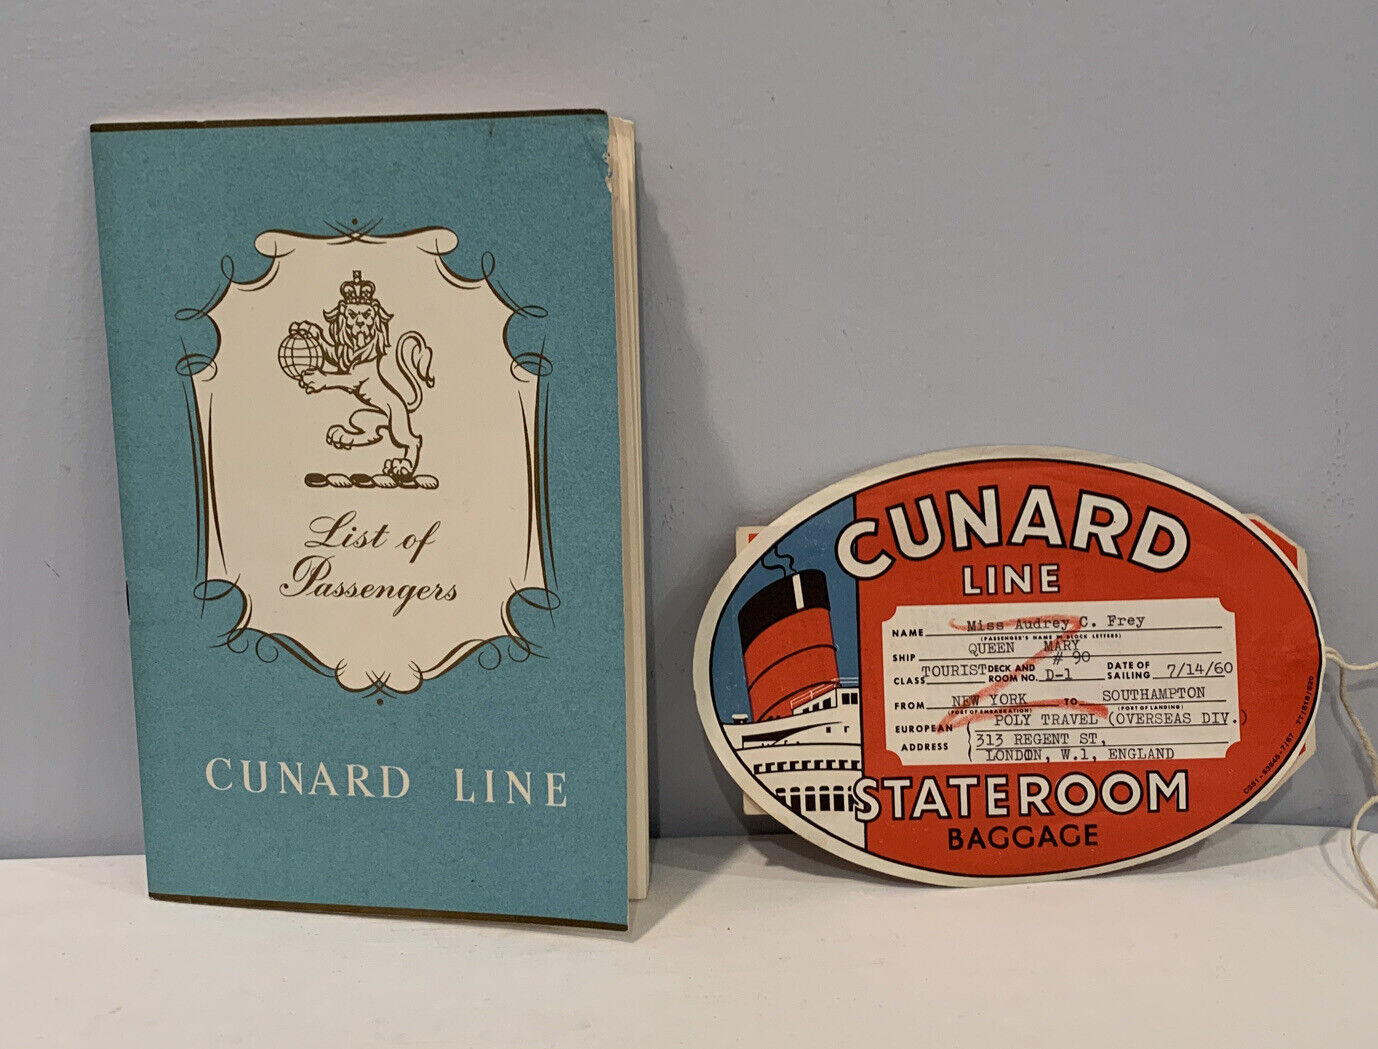 VTG Cunard Line Queen Mary July 14,1960 List Of Passengers Book And Baggage Tag